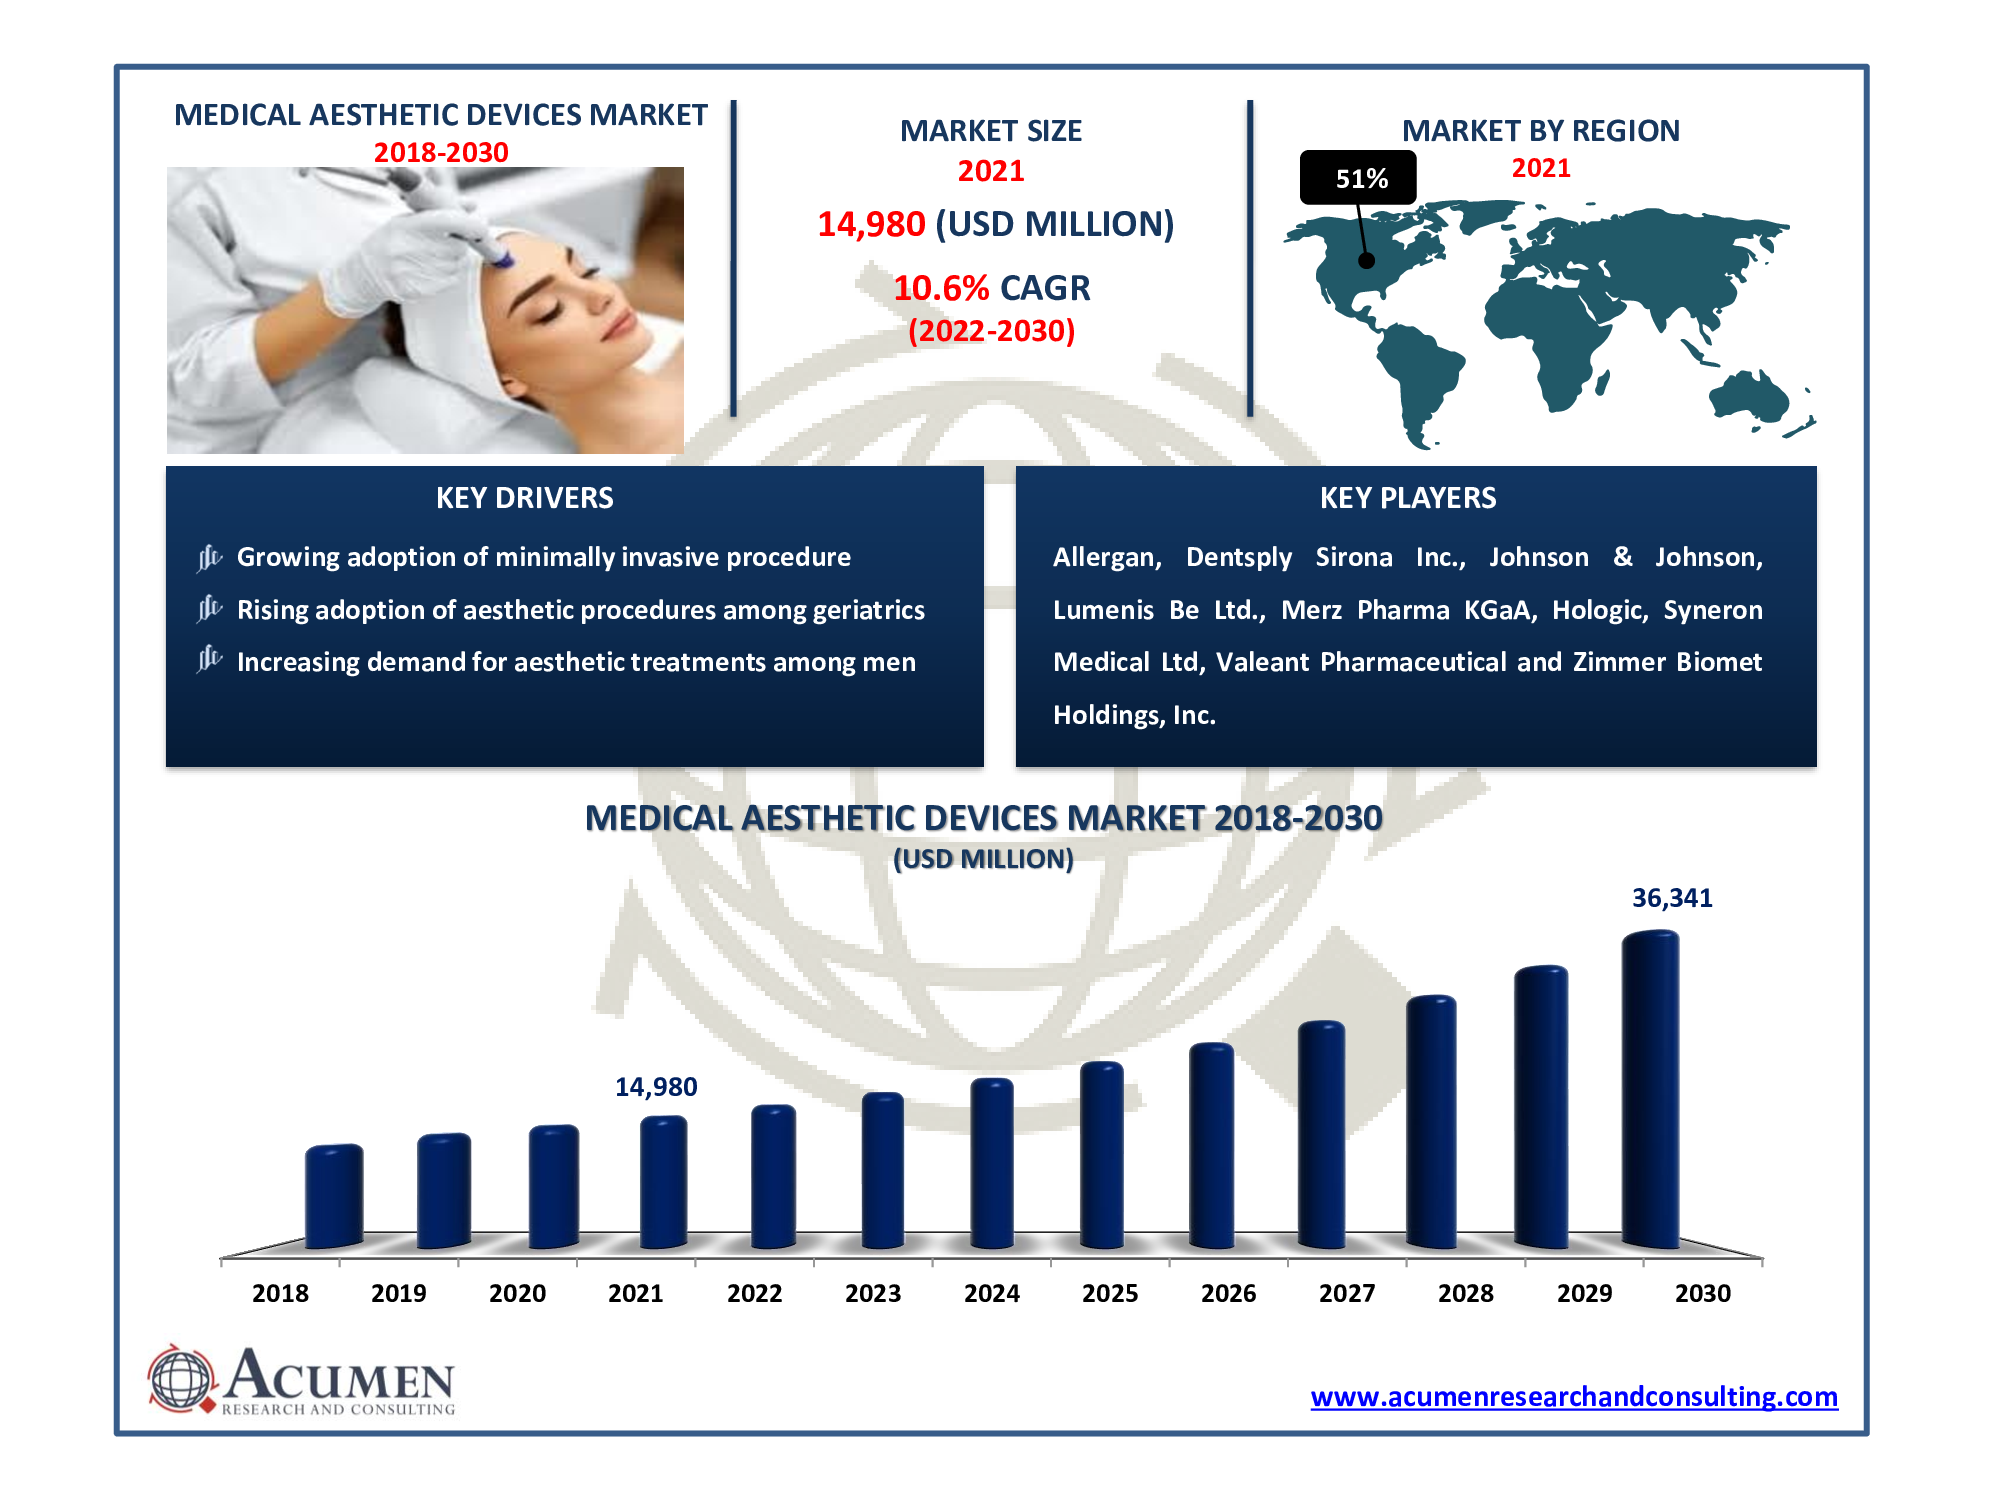 Medical Aesthetic Devices Market size accounted for USD 14,980 Million in 2021 and is estimated to reach USD 36,341 Million by 2030.